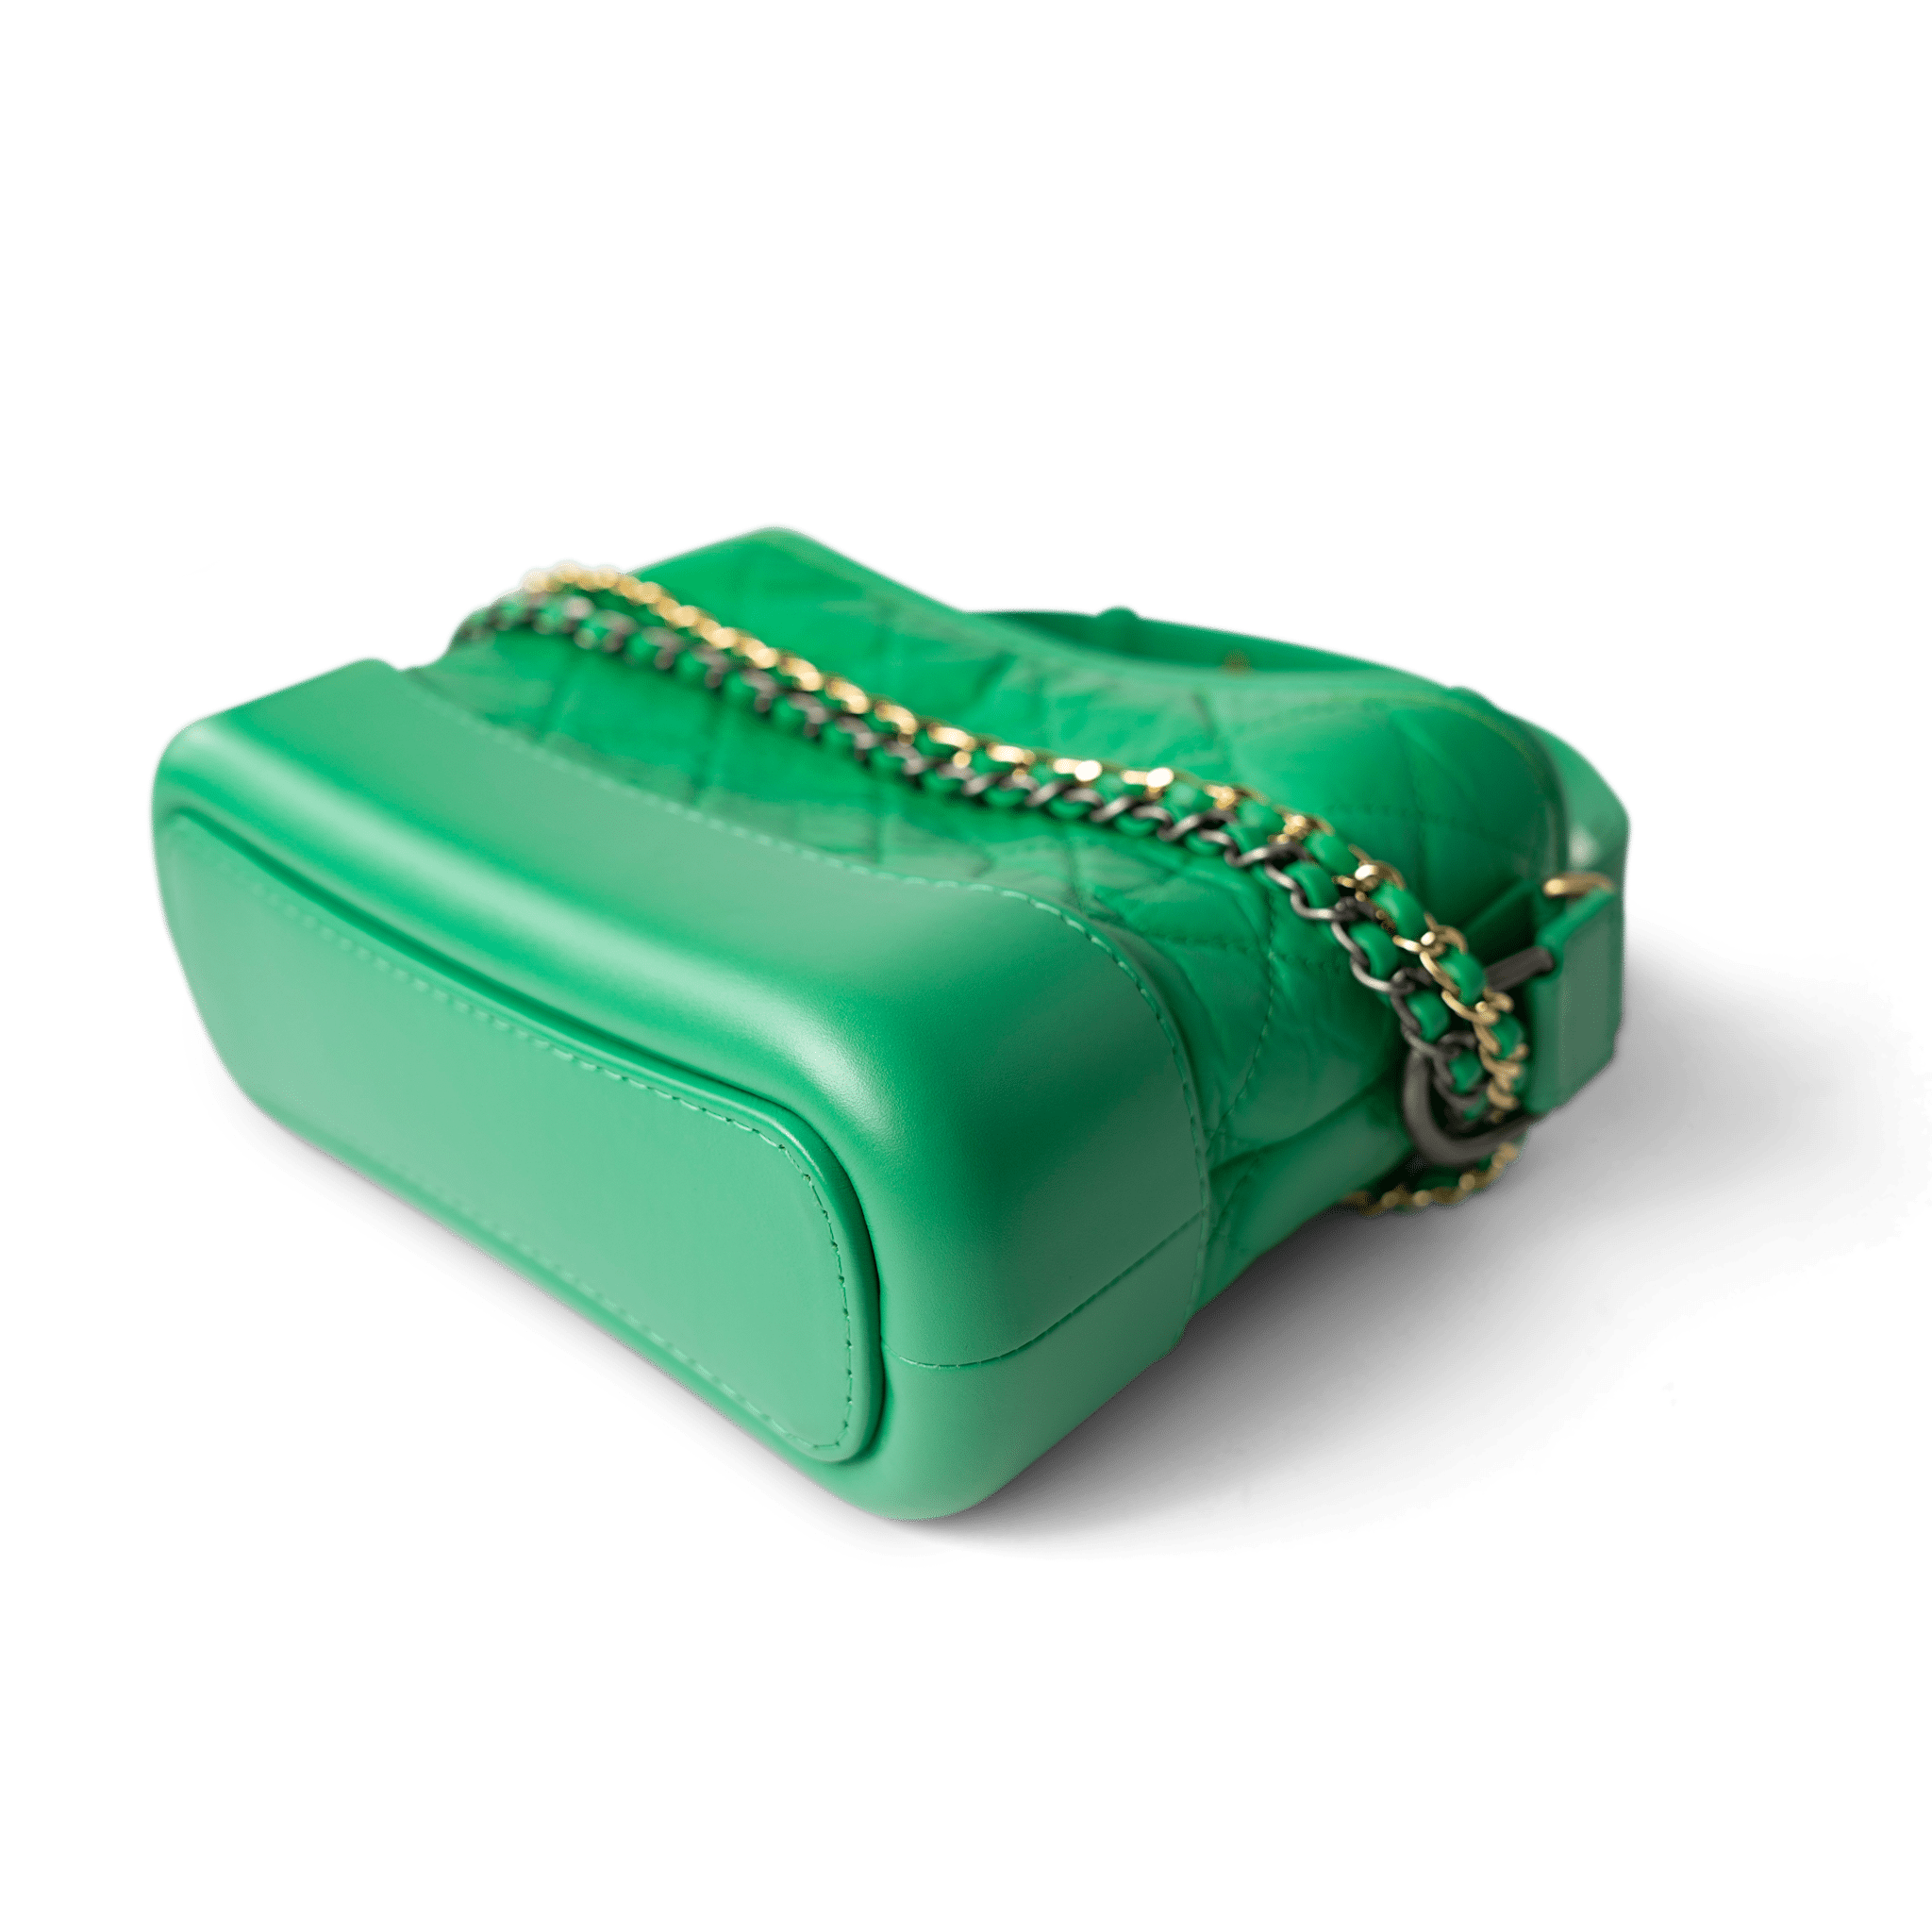 CHANEL Handbag Green / Gabrielle Green Aged Calfskin Quilted Hobo Gabrielle Bag Small Mixed Hardware - Redeluxe